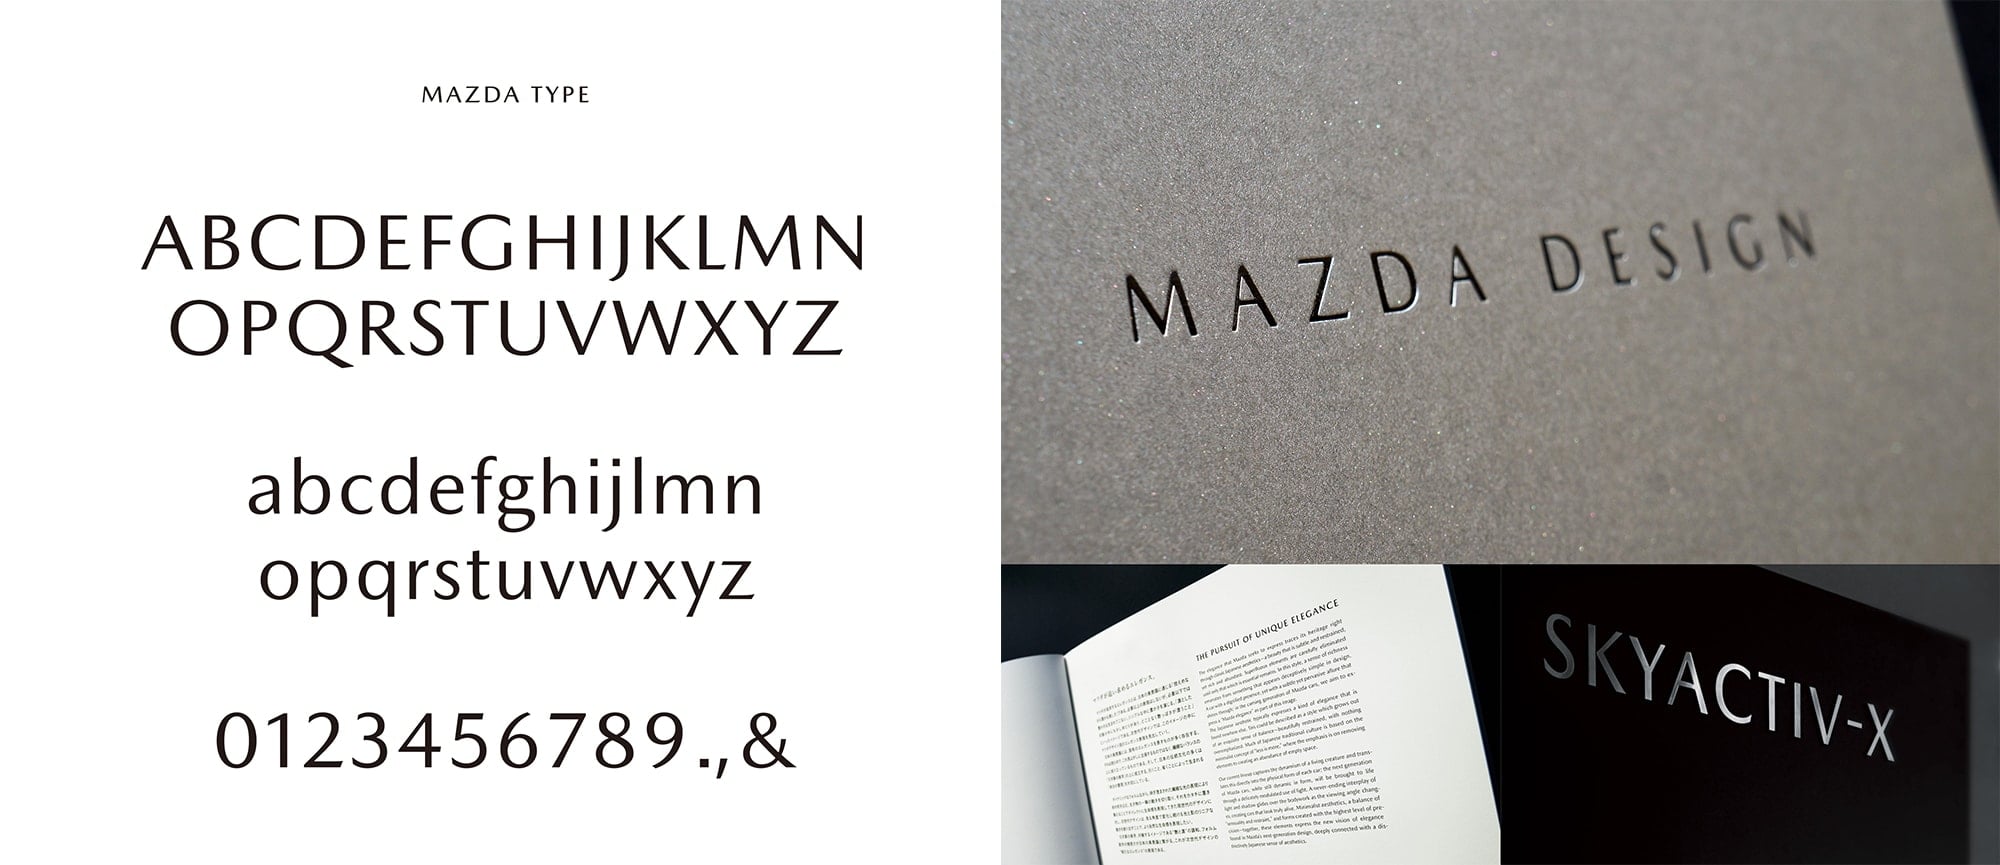 Mazda Type is a font developed originally by Mazda. The font has delicate adjustments of narrowing the top, and expanding the bottom to create the stableness. The aesthetic of the KODO design can be felt from each letter. Photography by © MAZDA